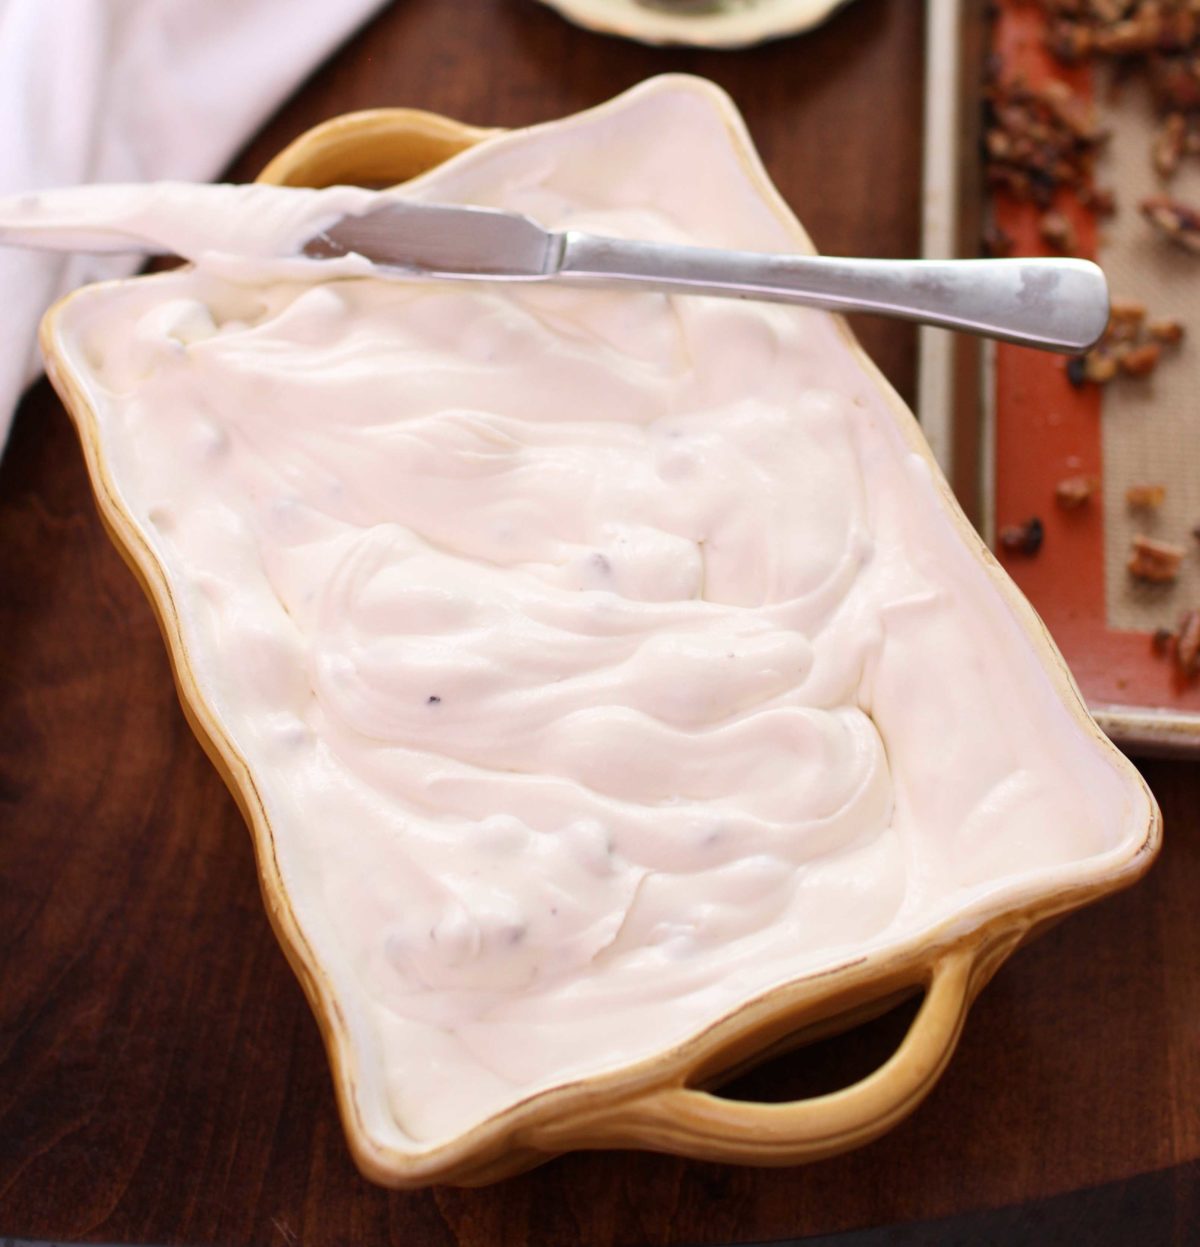 butter pecan ice cream in a yellow long baking dish with a knife resting on the side of the dish